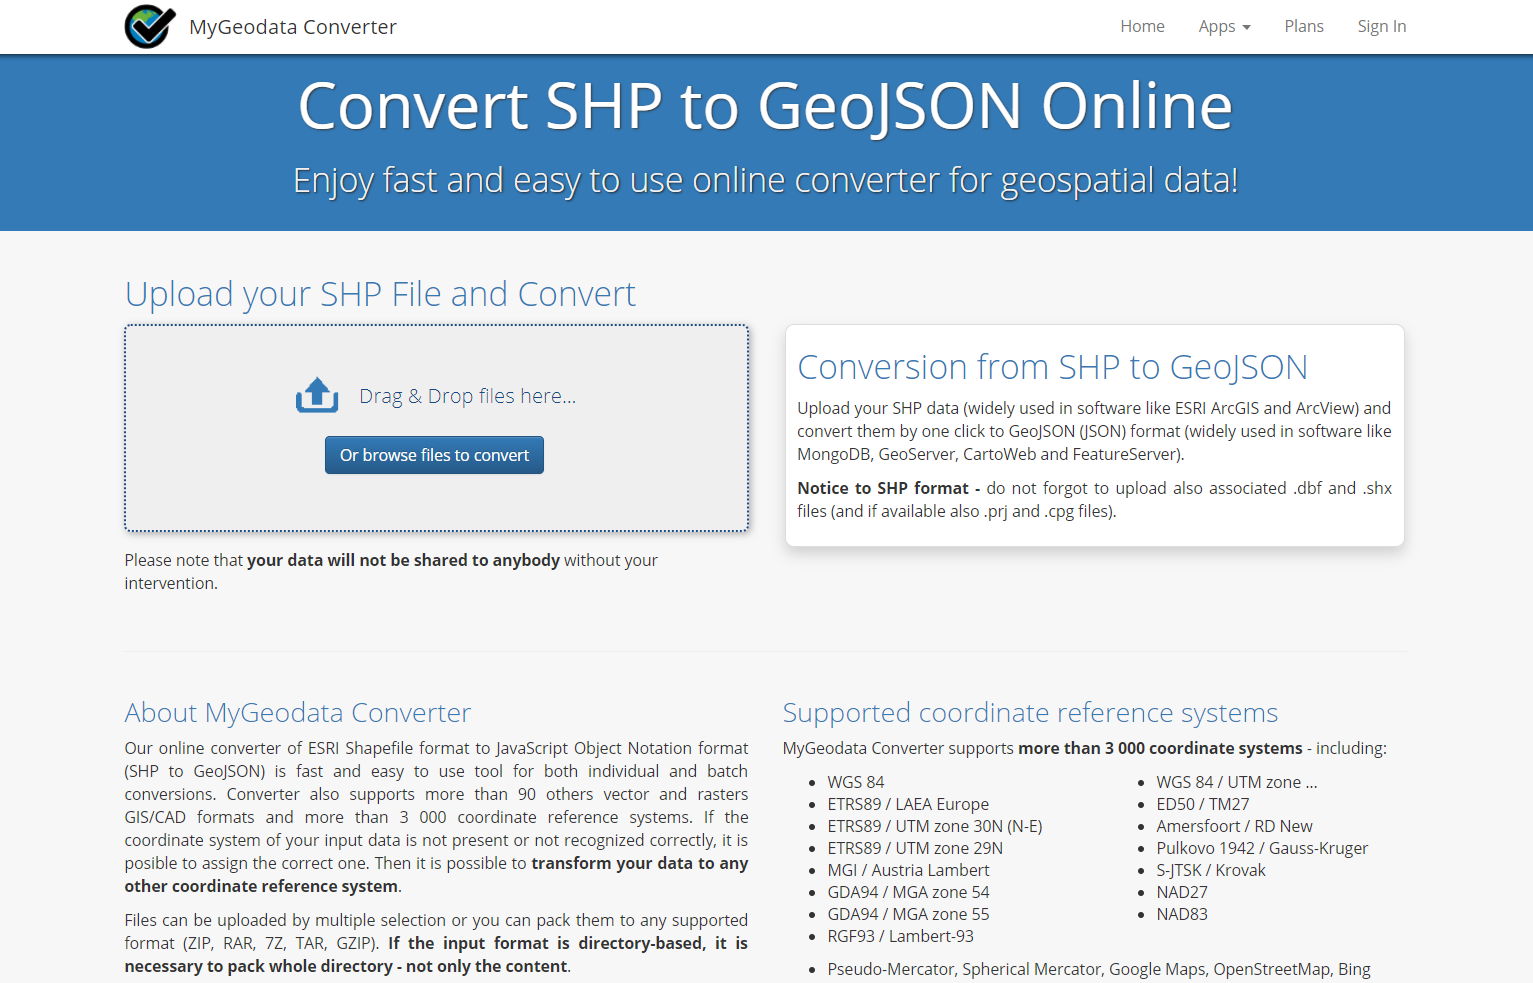 The display of MyGeoData Converter site